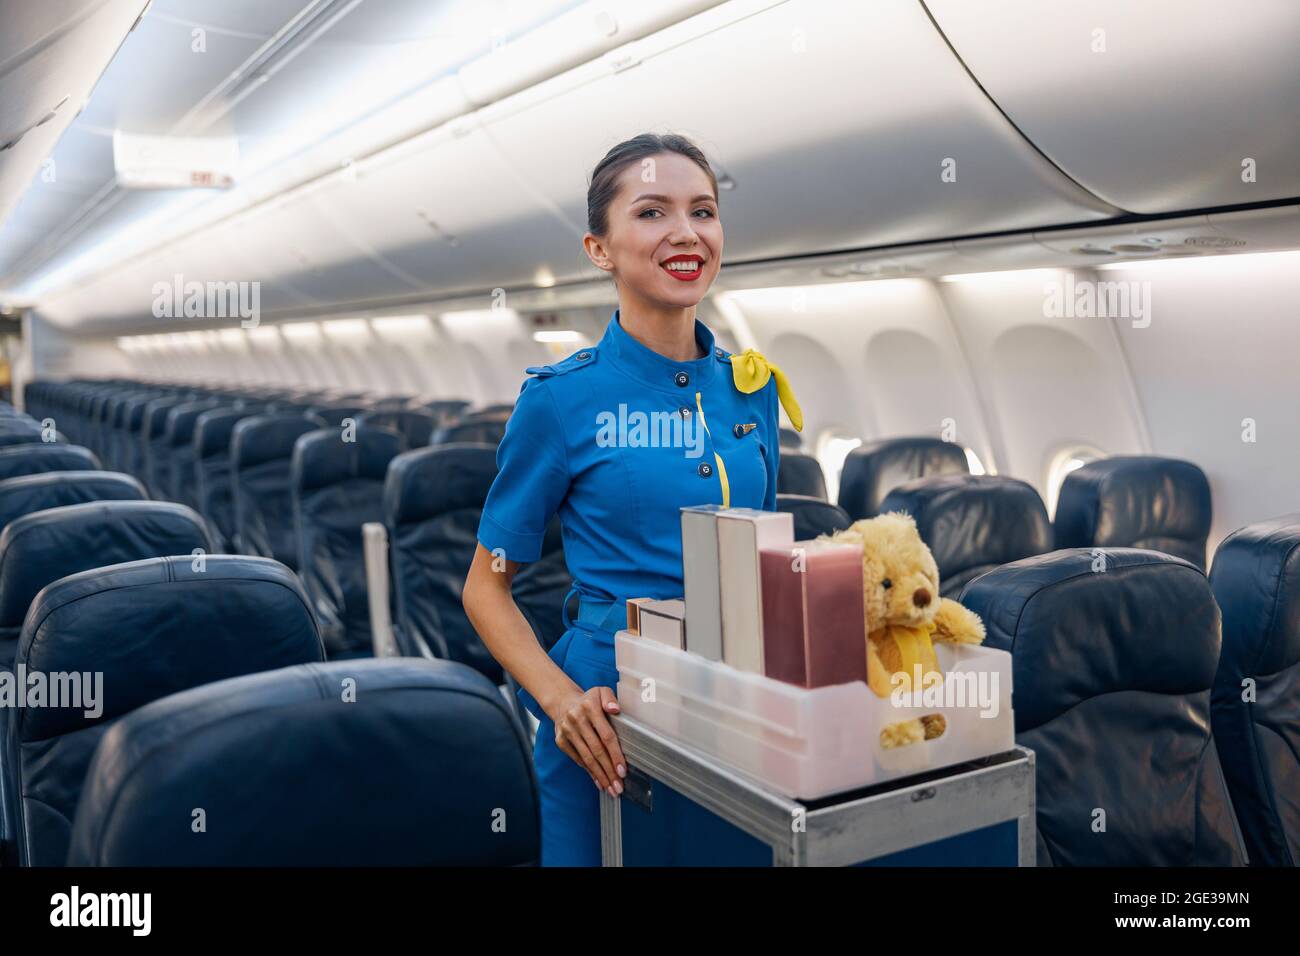 Cheerful female air hostess in bright blue uniform smiling at camera while leading trolley cart with gifts through empty plane aisle Stock Photo